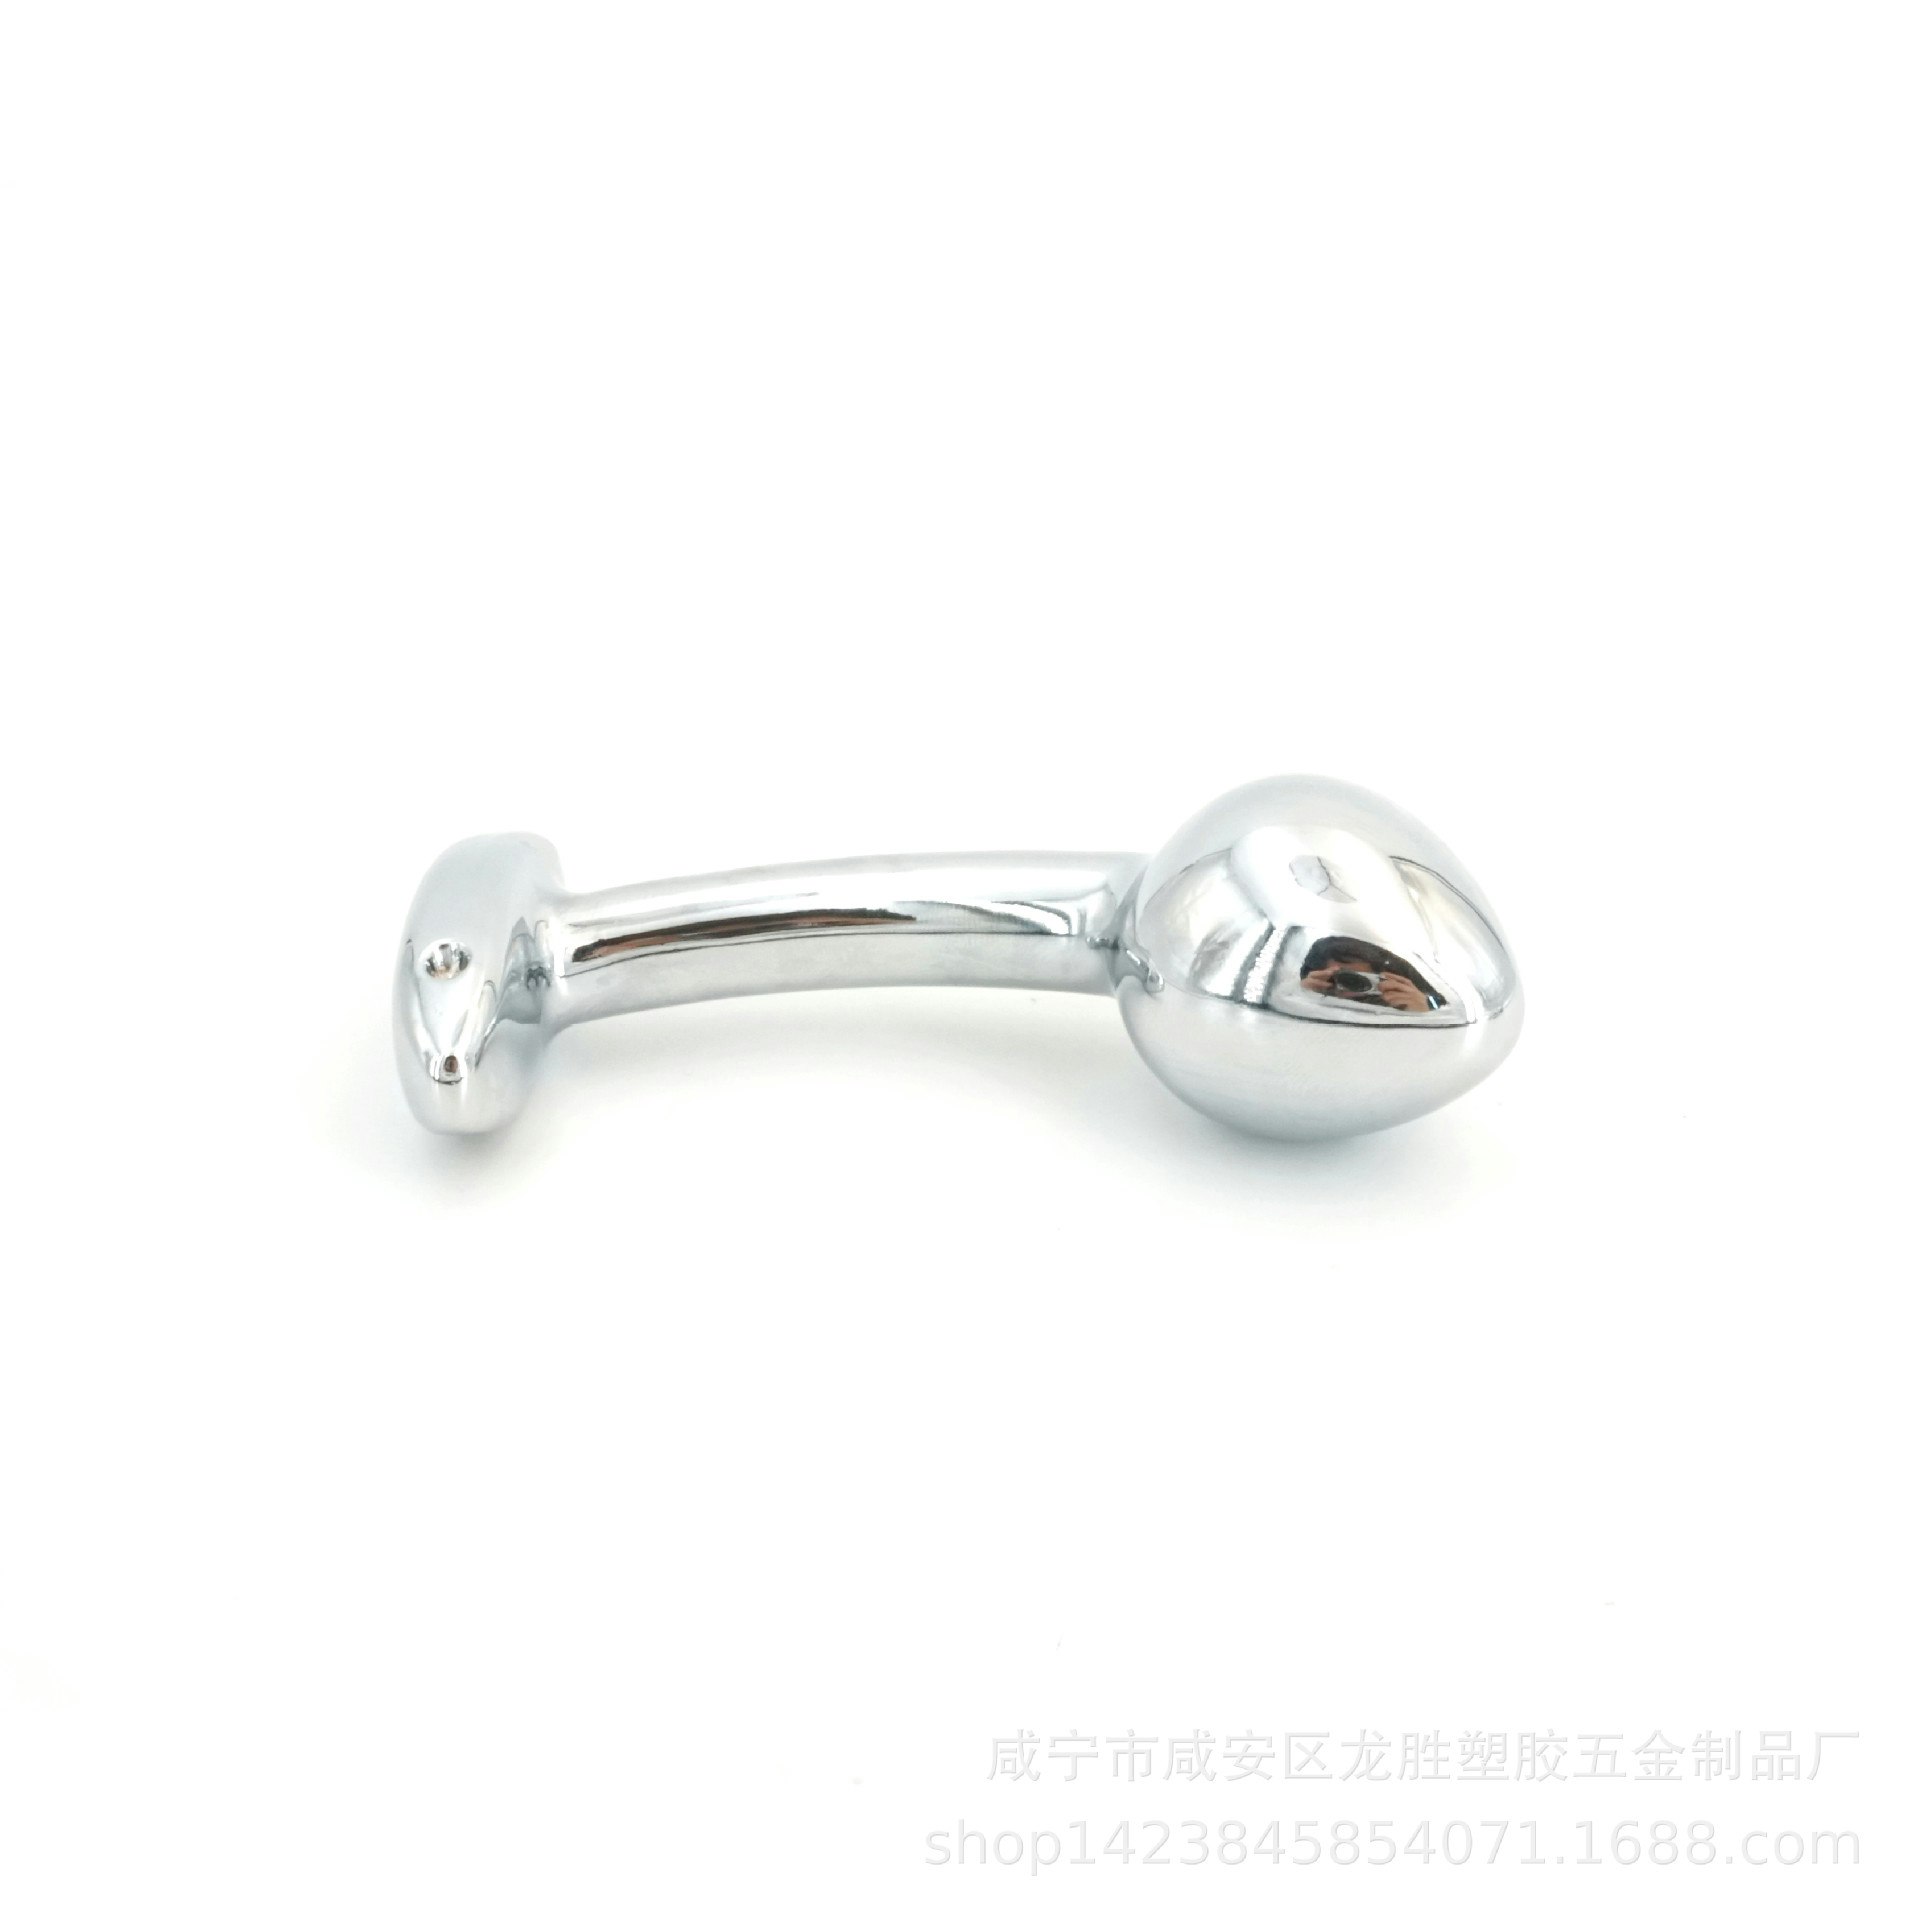 Buttplug Silver Small